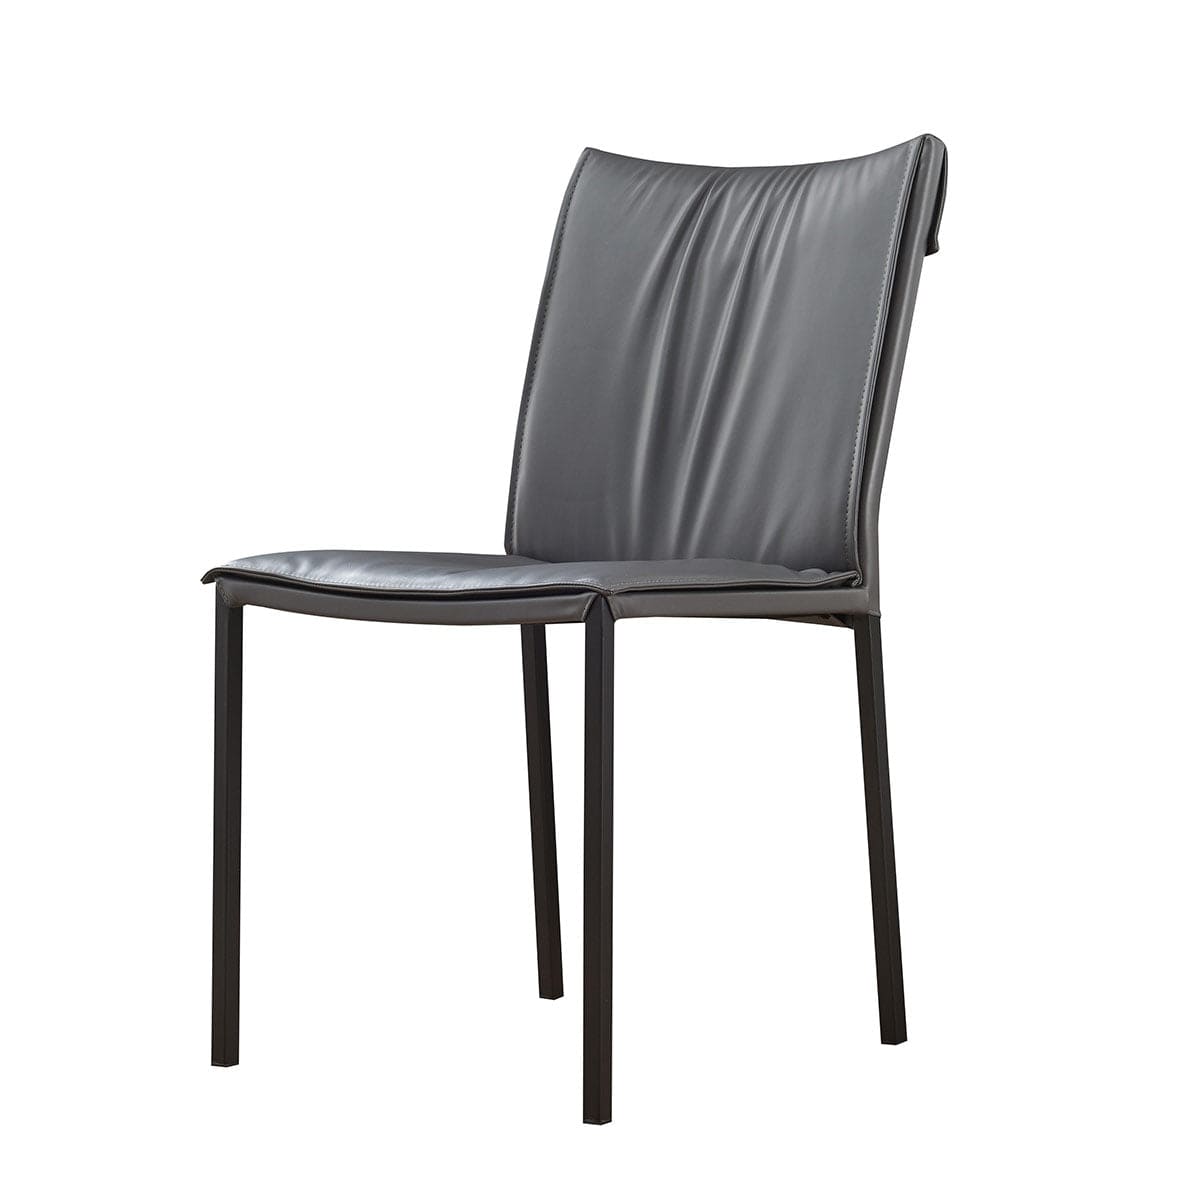 J and M Furniture Dining Chair Las Vegas Dining Chair in Grey | J&M Furniture